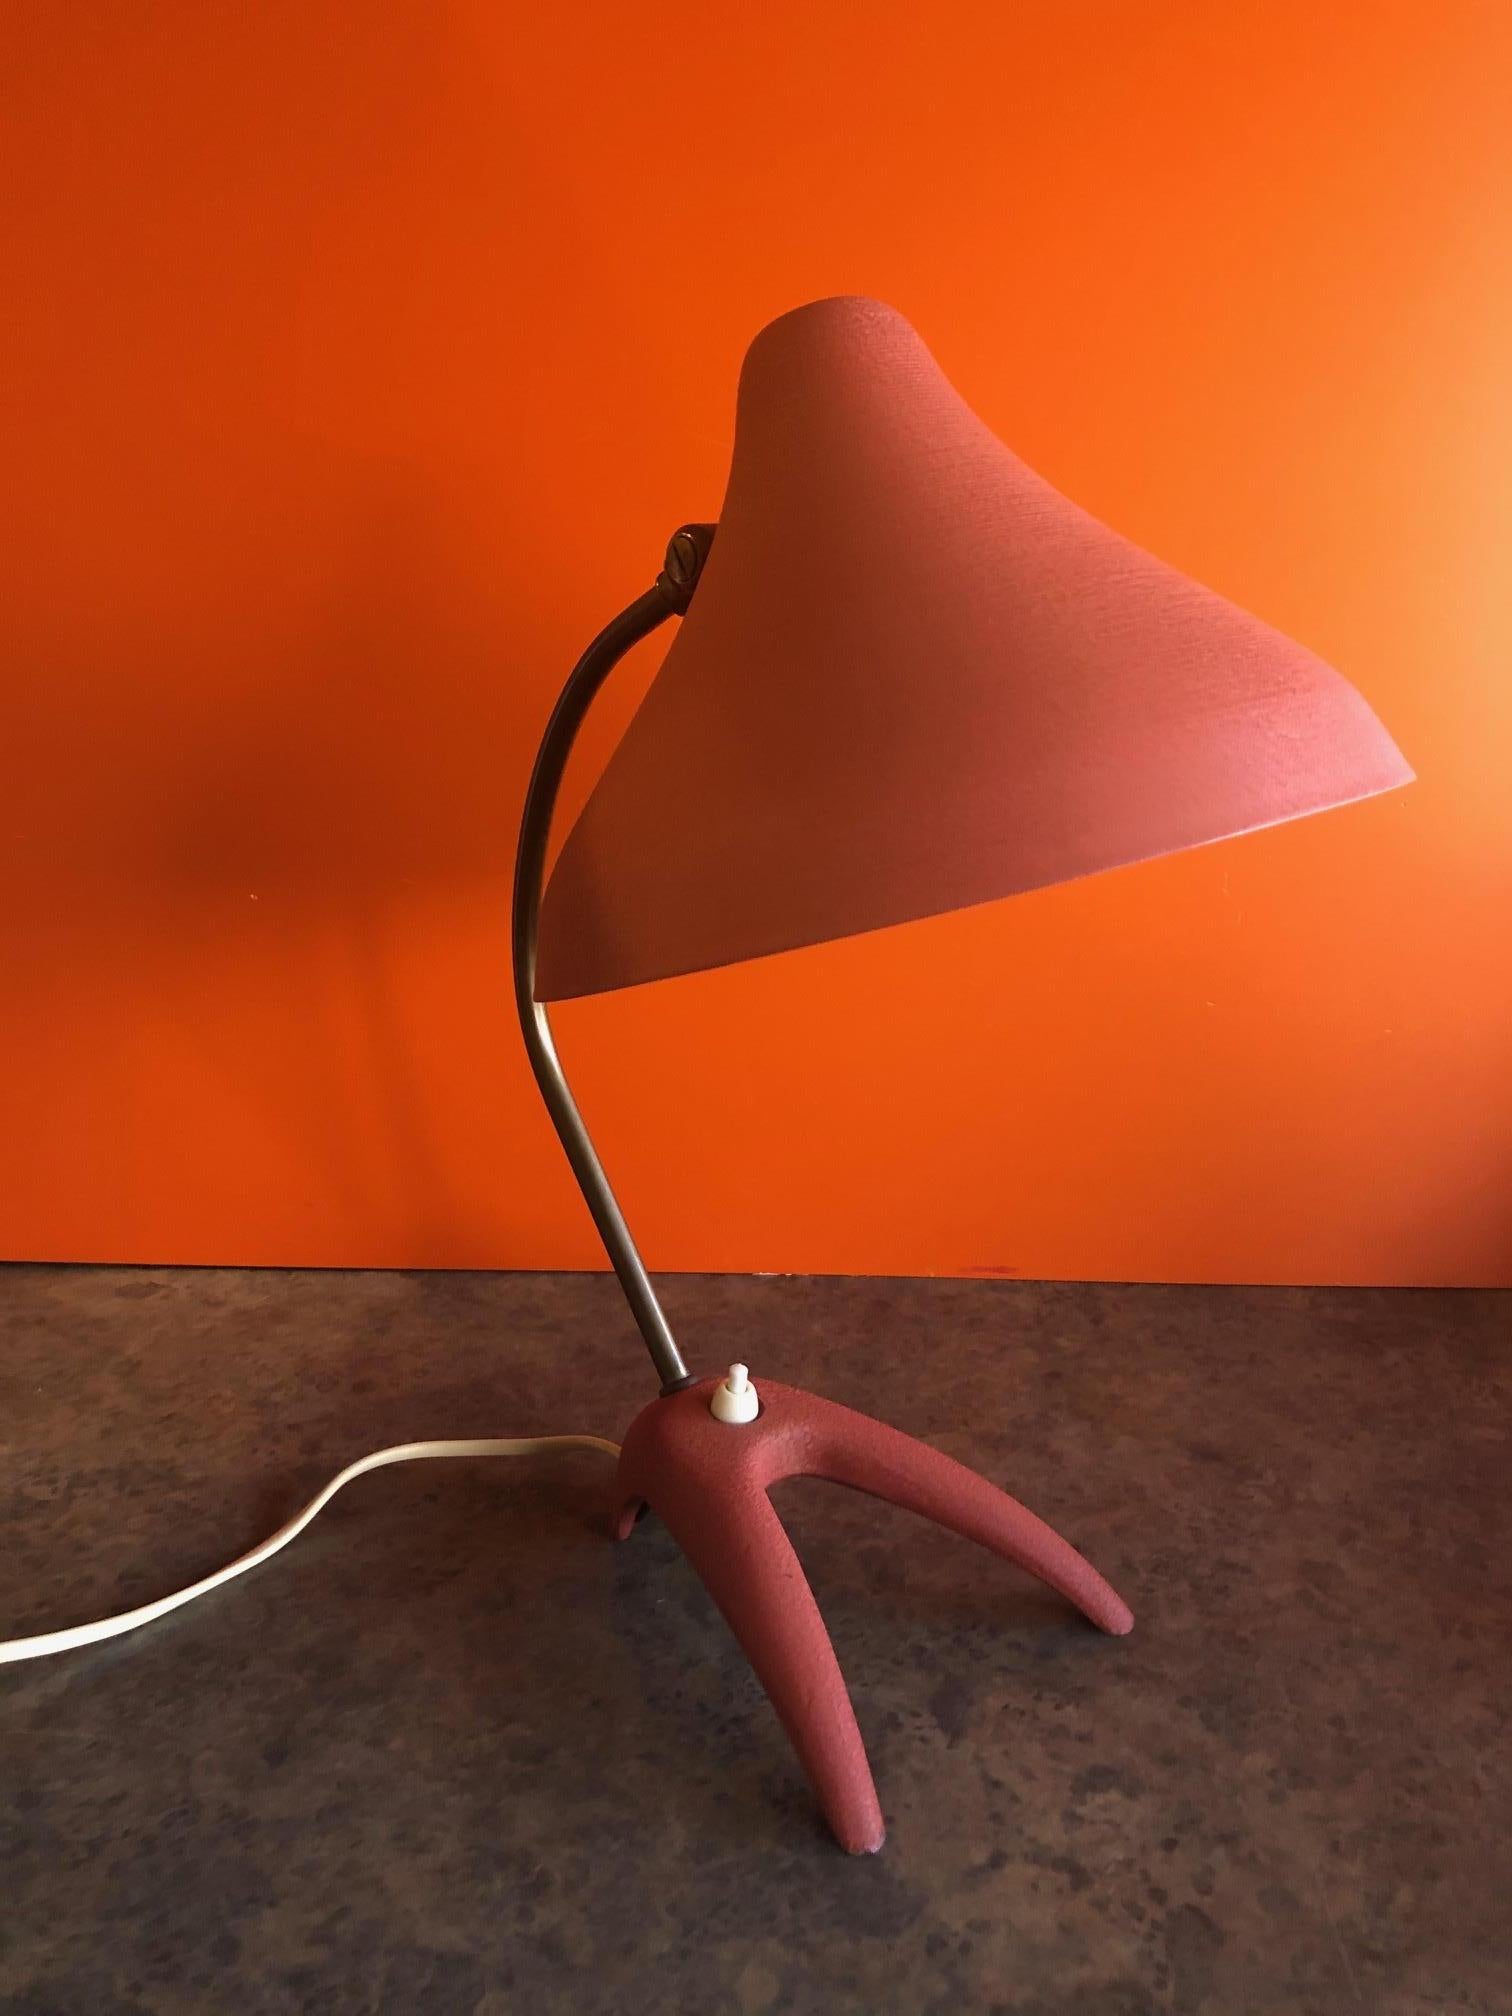 Modernist claw foot desk lamp by Louis Kalff for Phillips, circa 1950s. The lamp is in very nice original condition with original cord and red / orange paint. The conical shade is made of aluminum and is held by a curved brass stem (great patina) on